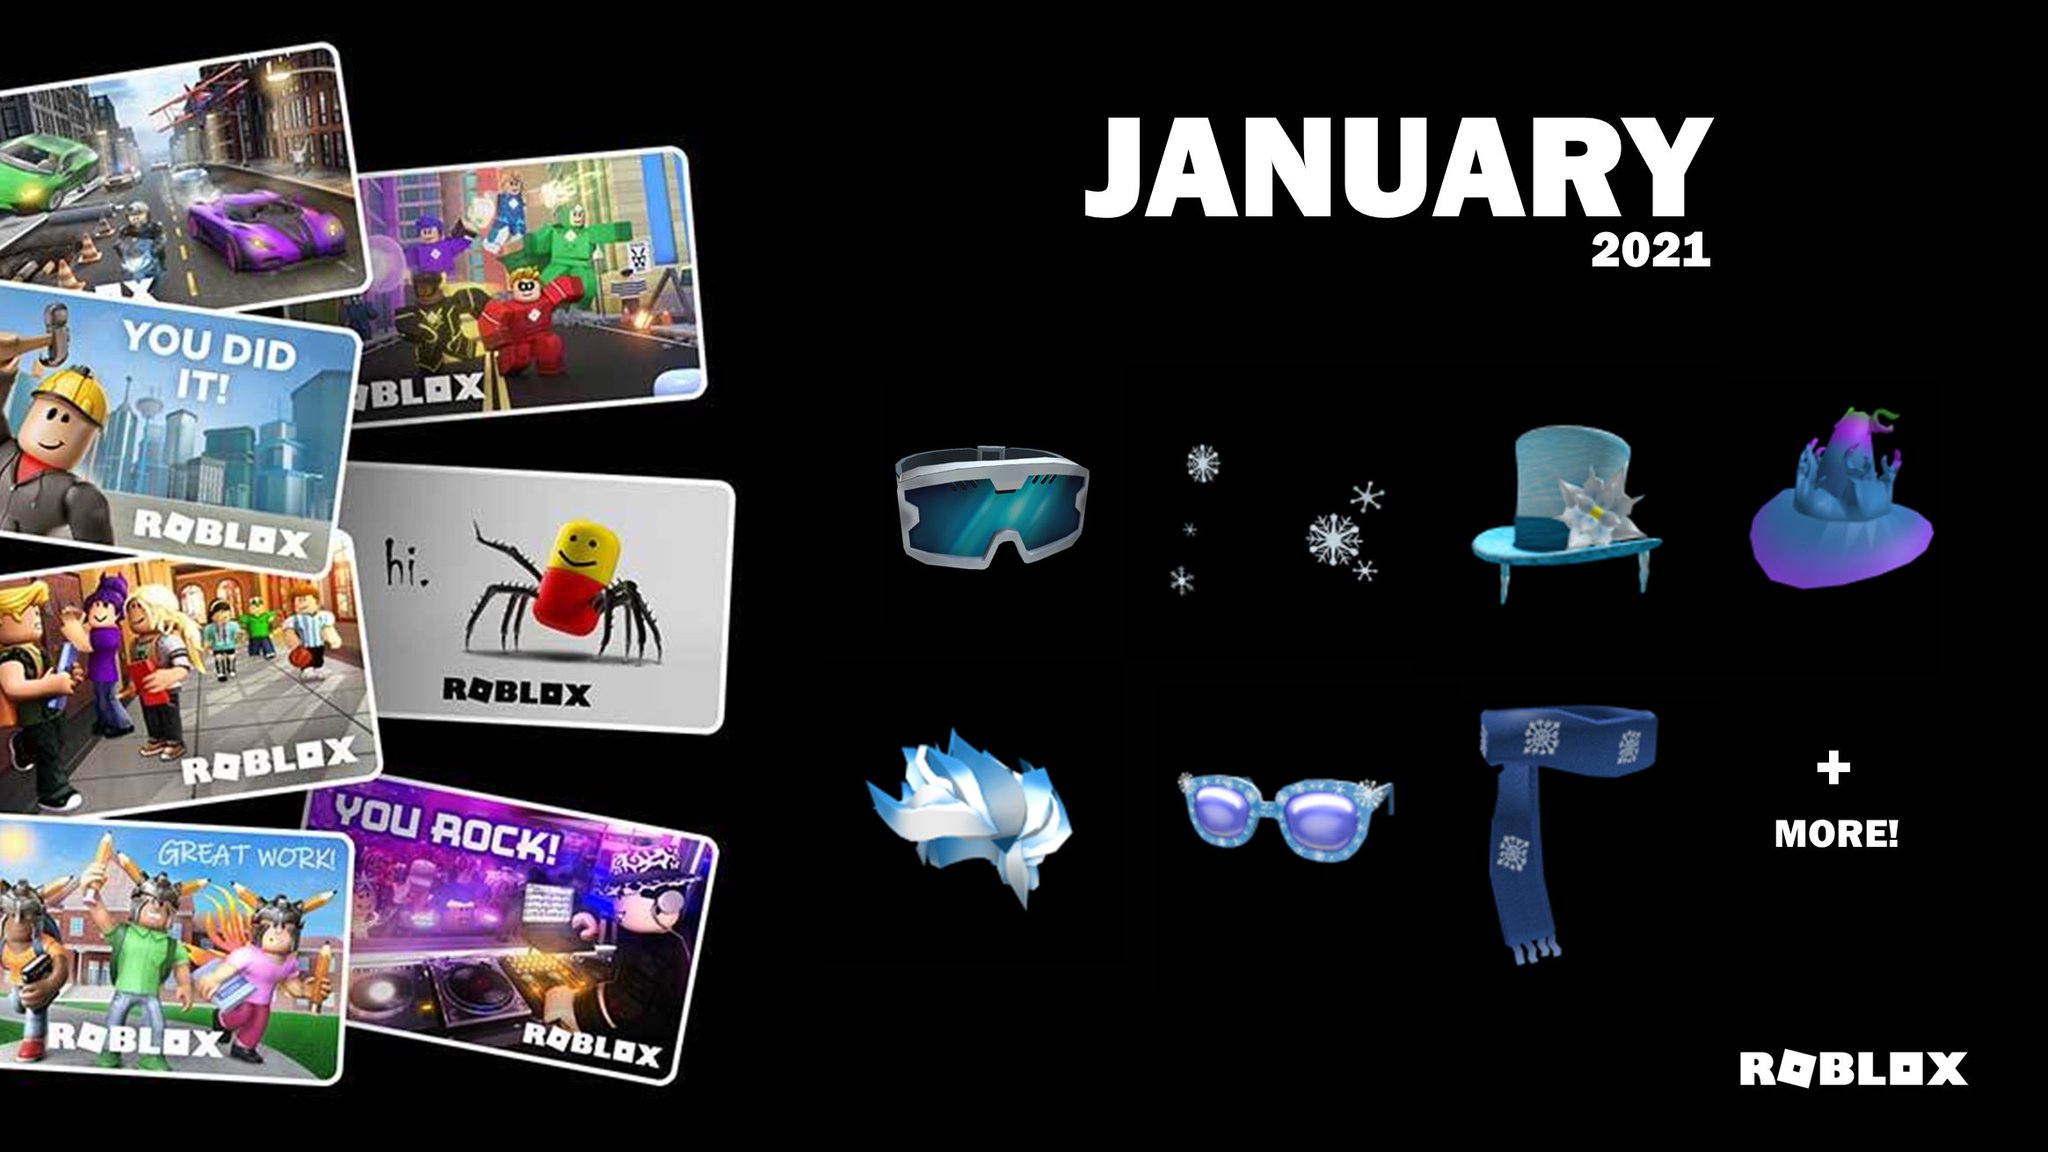 Bloxy News On Twitter The Roblox Gift Card Virtual Items And Their Corresponding Stores For January 2021 Are Now Available Check Them Out Here Https T Co Pujwqlz5yt Purchase A Gift Card - how to use a normal gift card on roblox